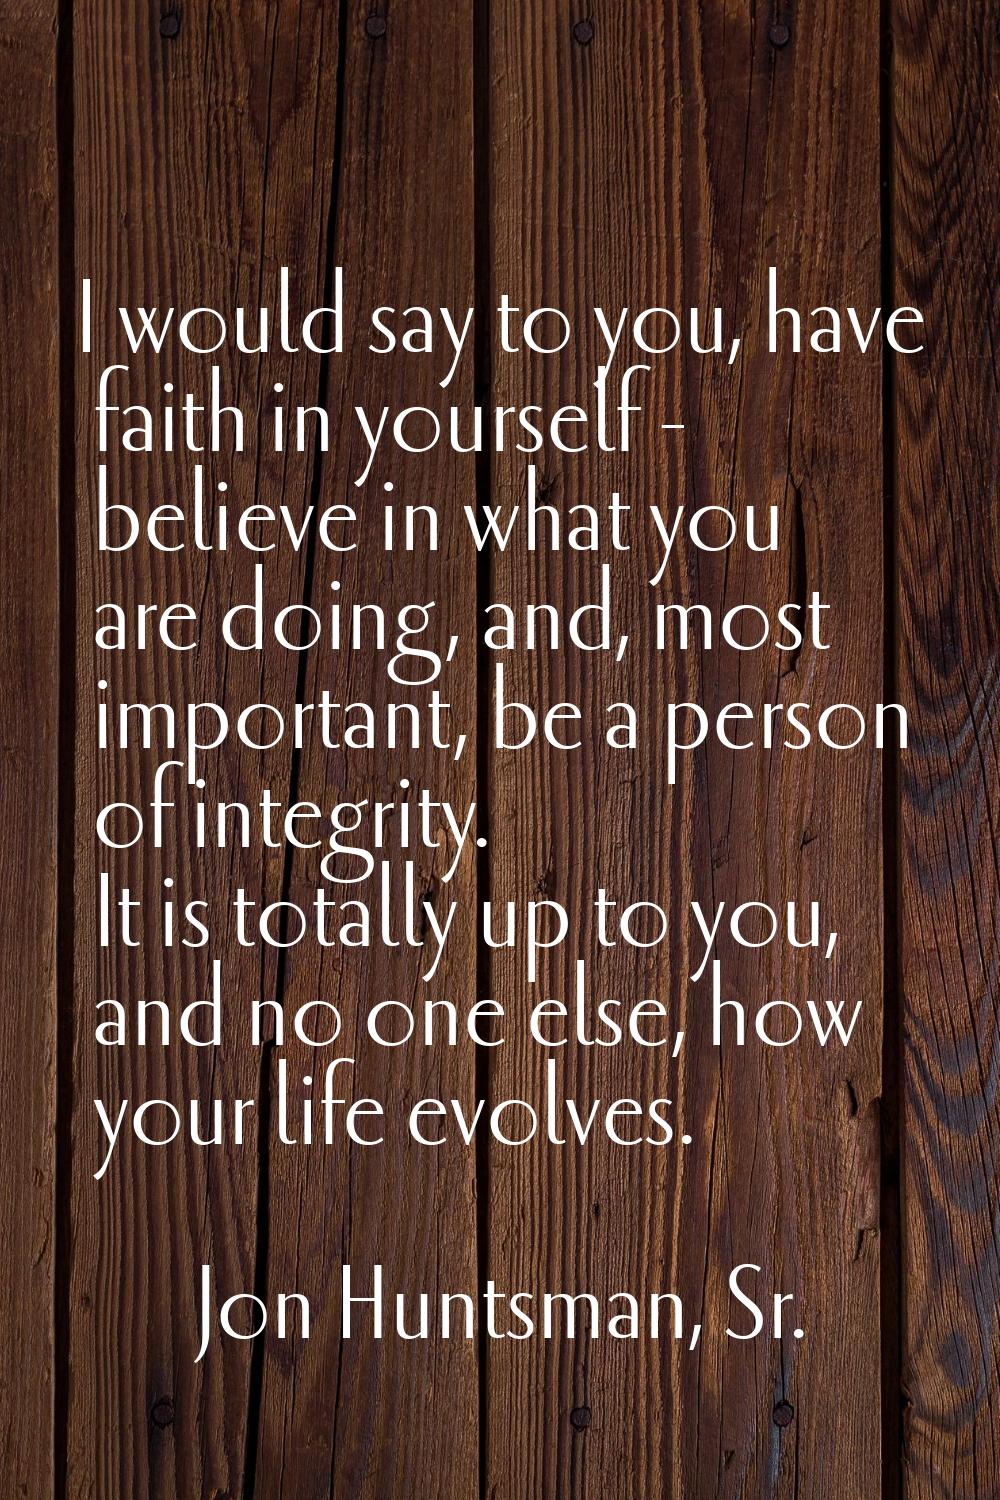 I would say to you, have faith in yourself - believe in what you are doing, and, most important, be